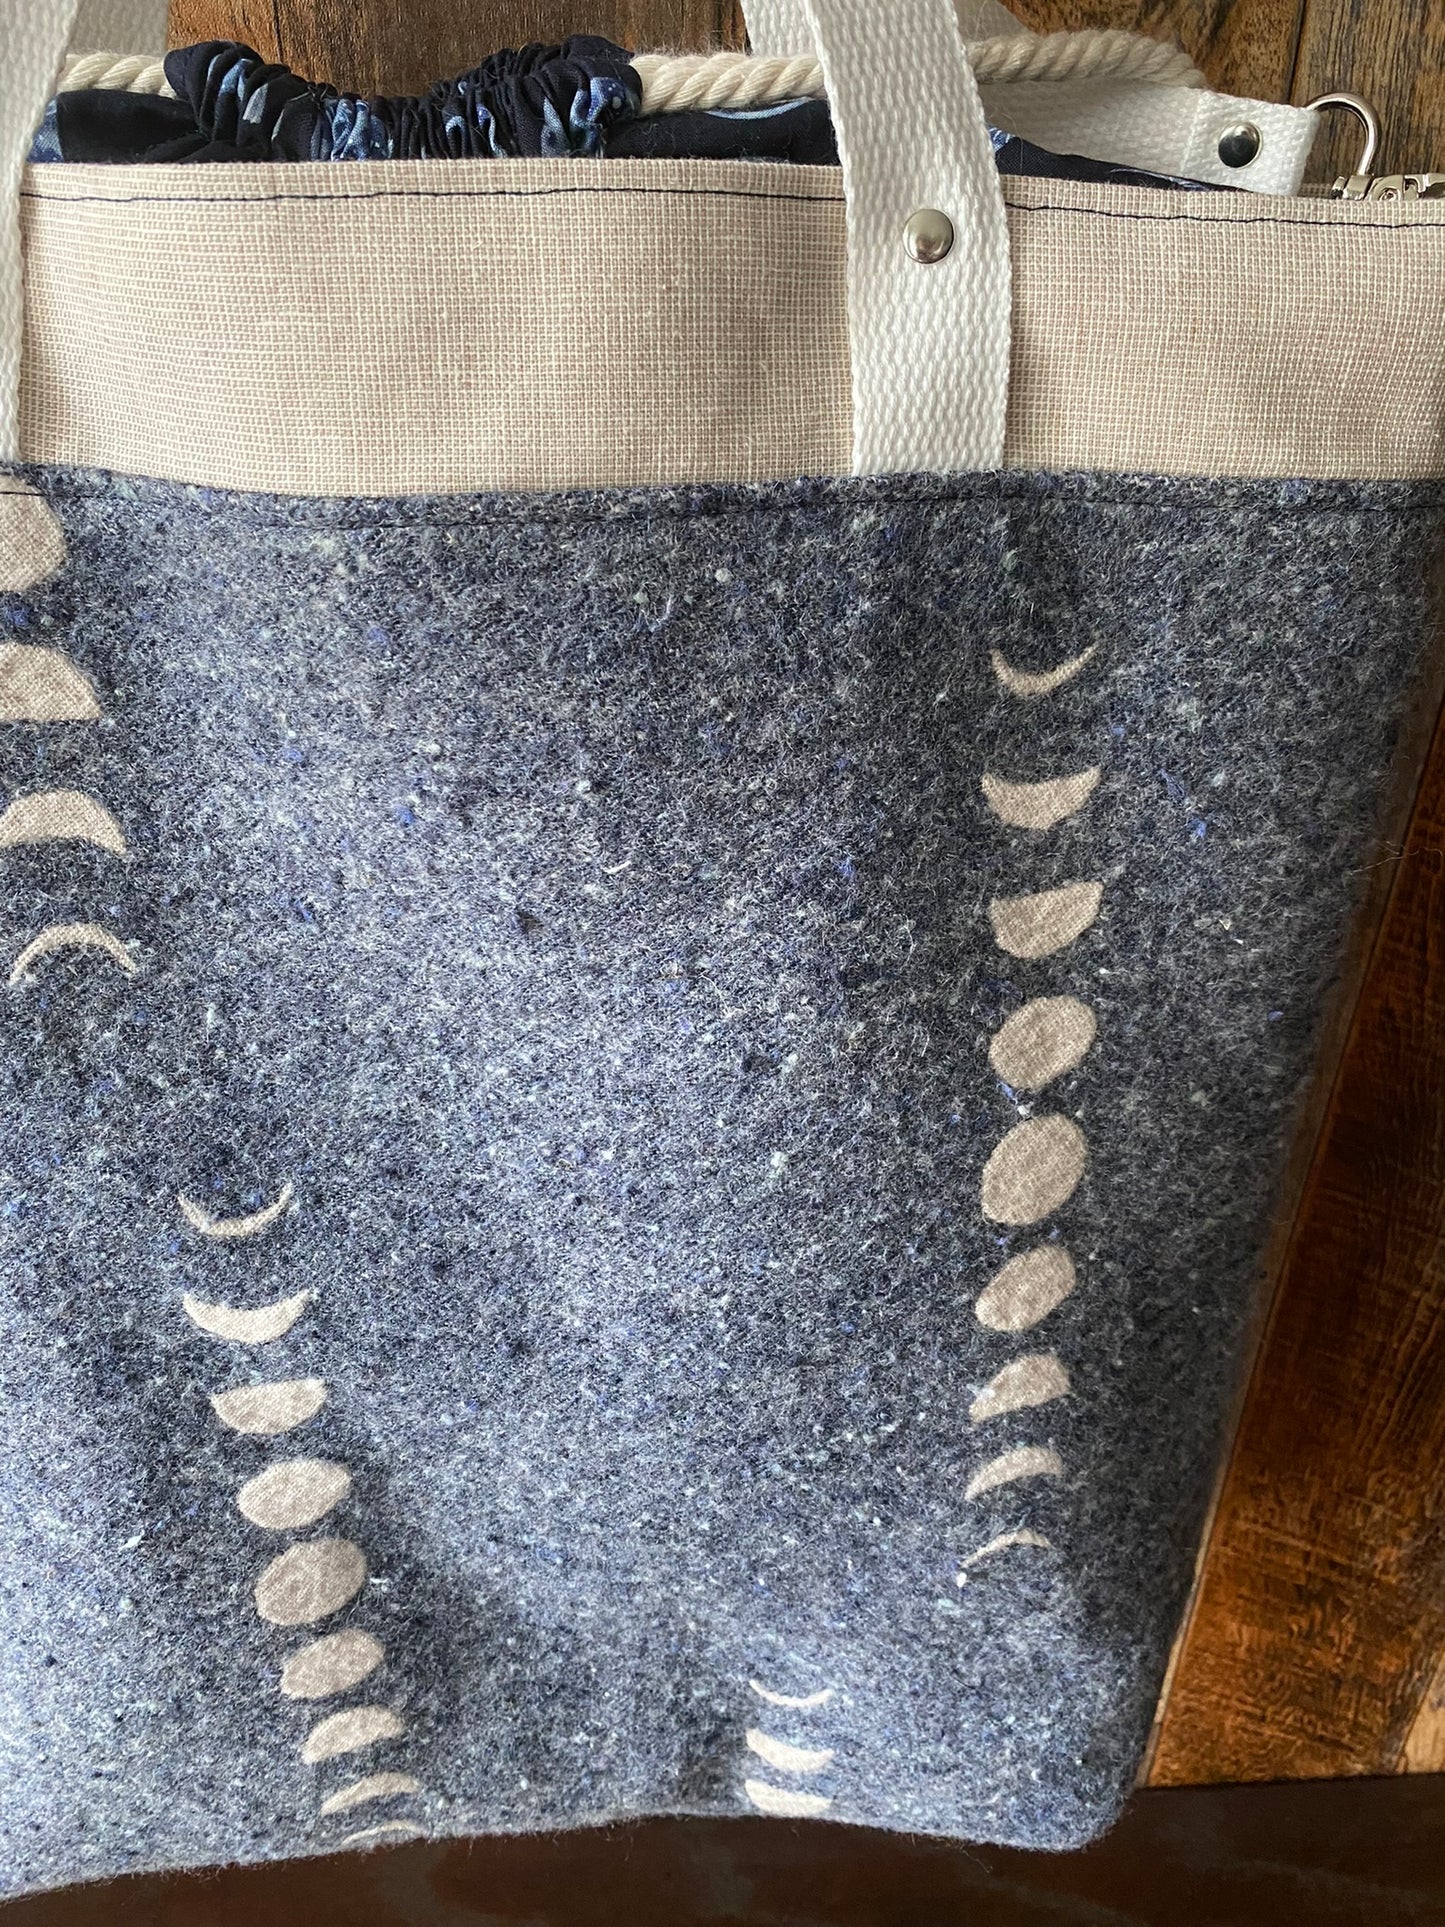 Lunar Phases Large Firefly Project Bag